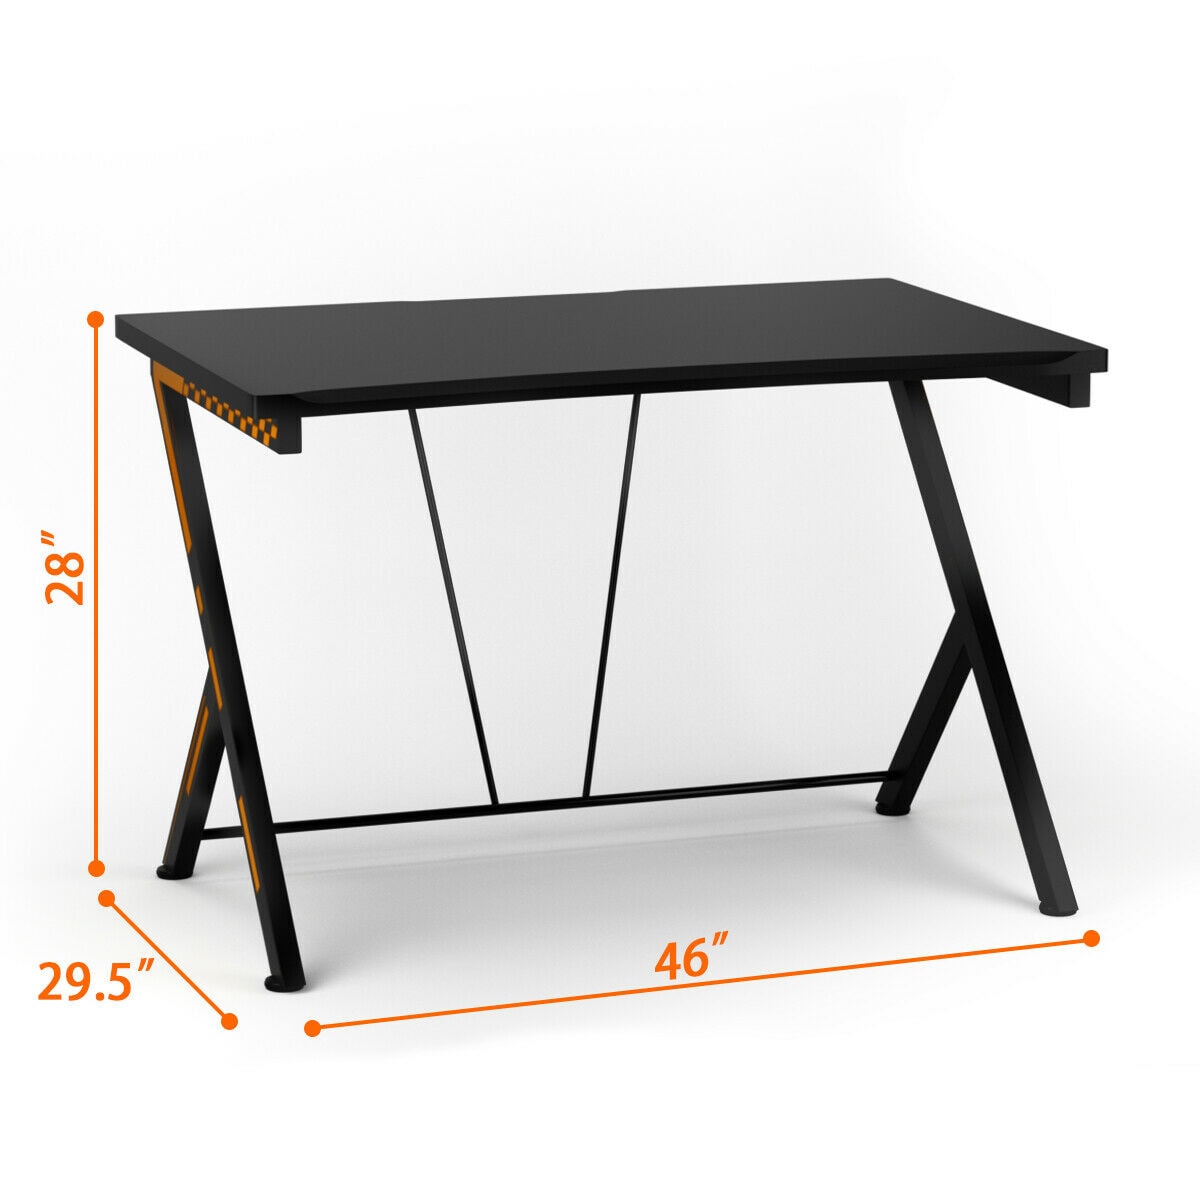   Basics Classic Home Office Computer Desk with Shelves,  29.5 x 19.6 x 35.5 Inches, Black : Home & Kitchen